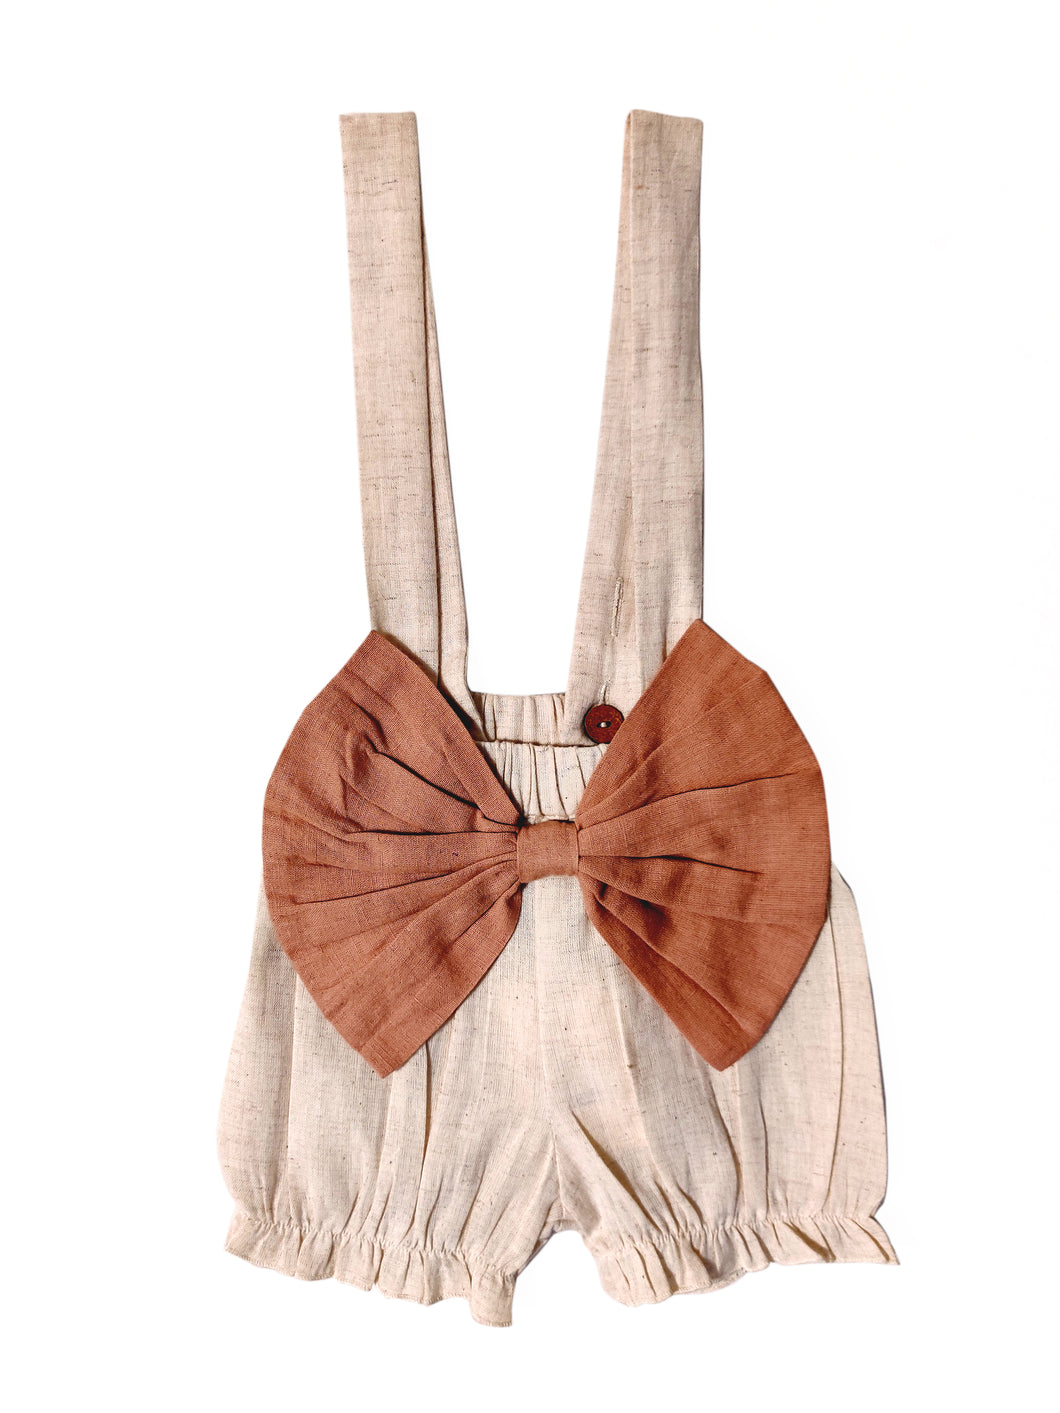 Oversized Bow & Suspenders Diaper Cover - Blush